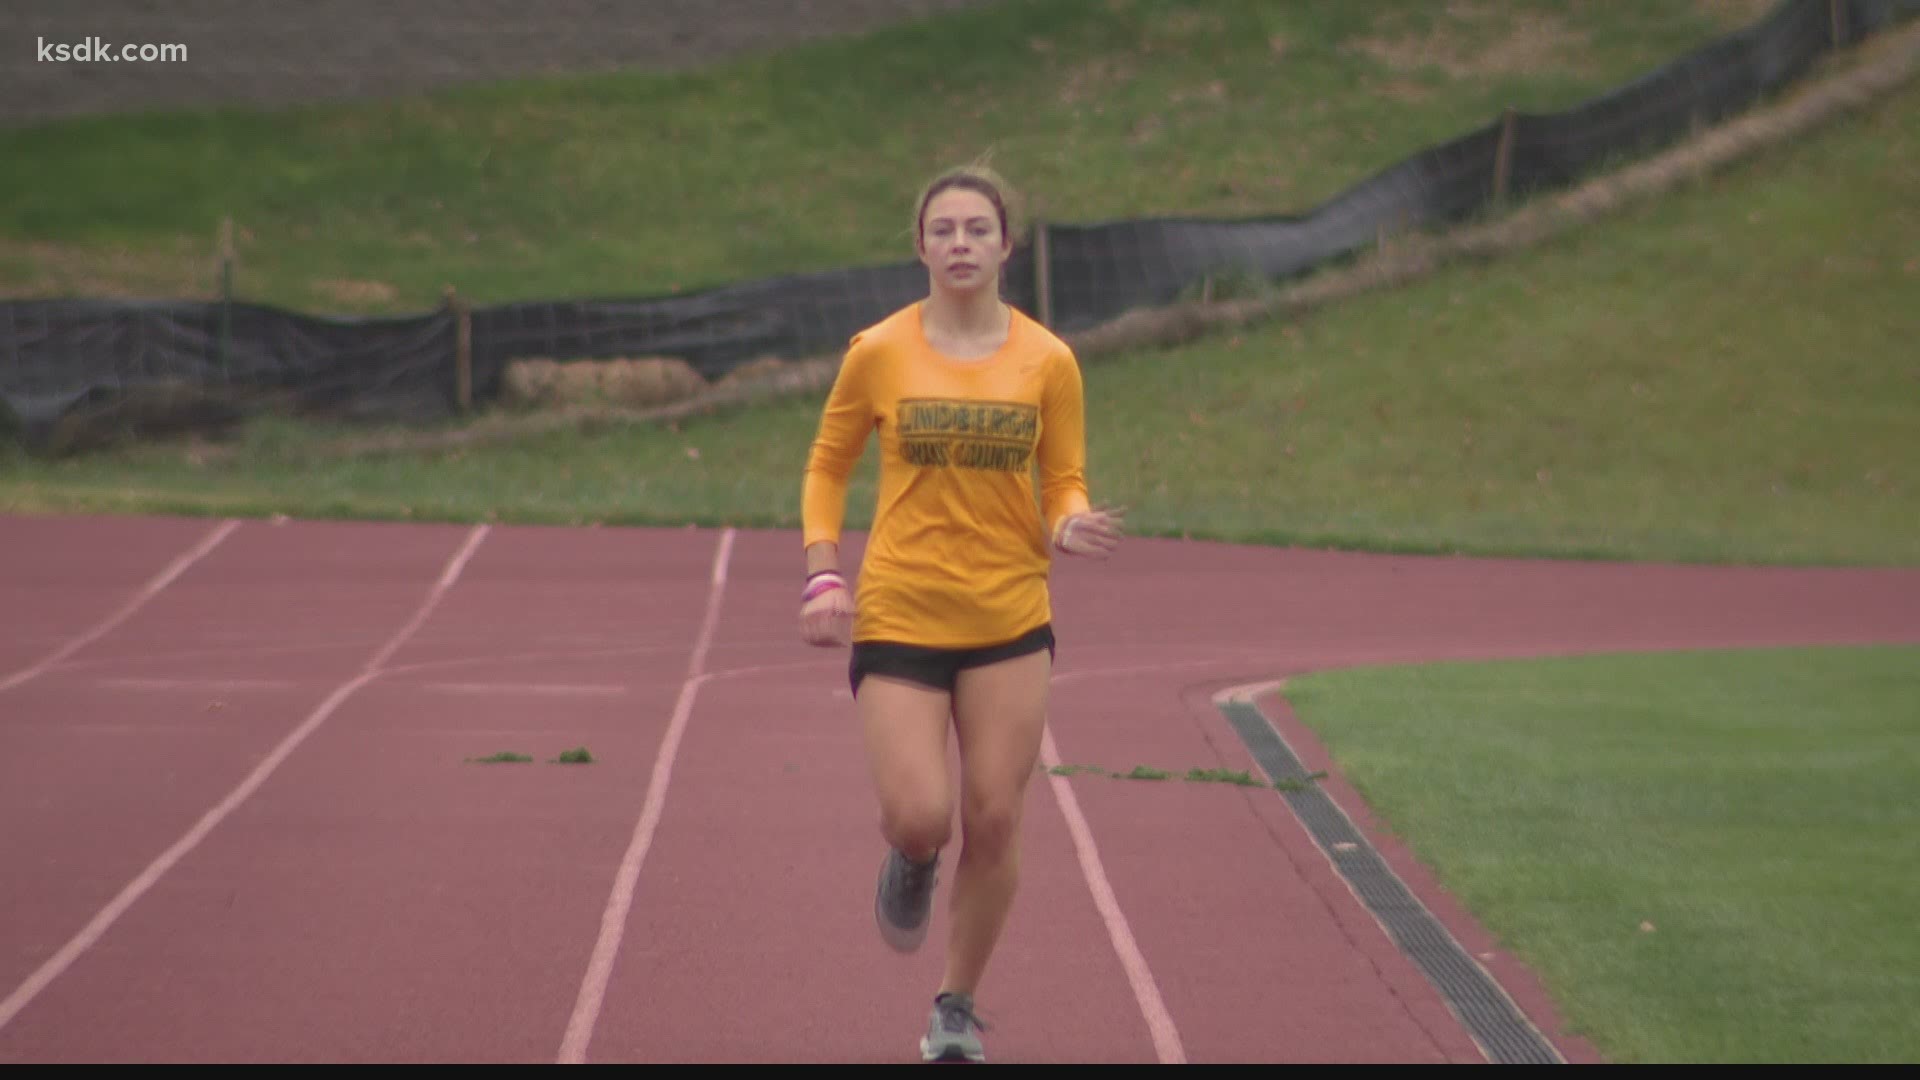 High school senior runner Ally Forbes has worked her way all the way back to the track finish line after undergoing open heart surgery